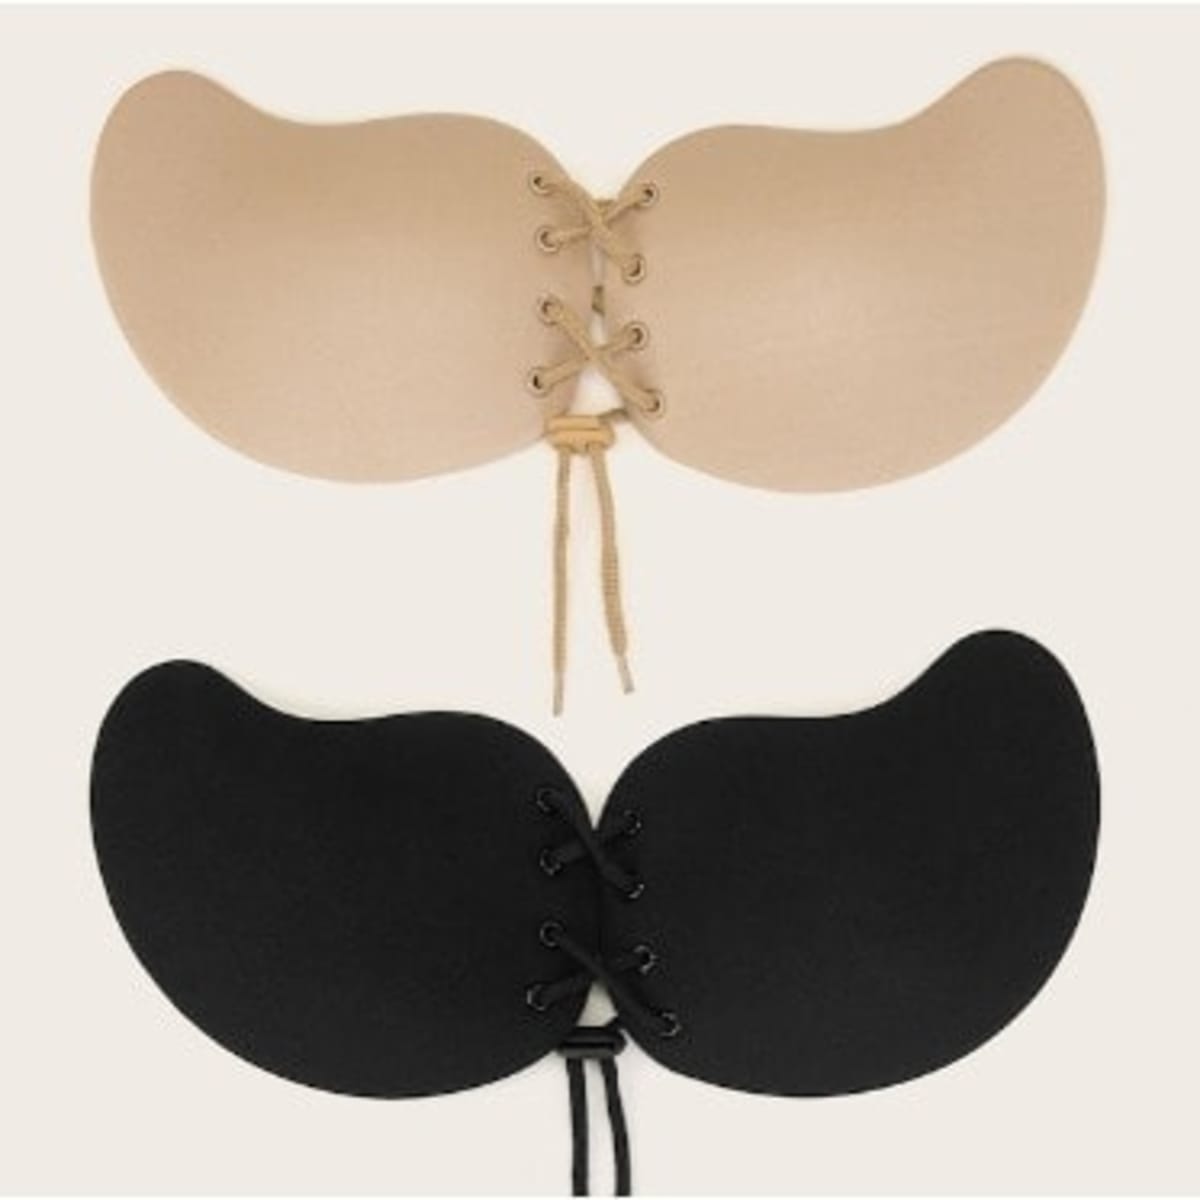 Self Adhesive Backless Bra - 2pieces